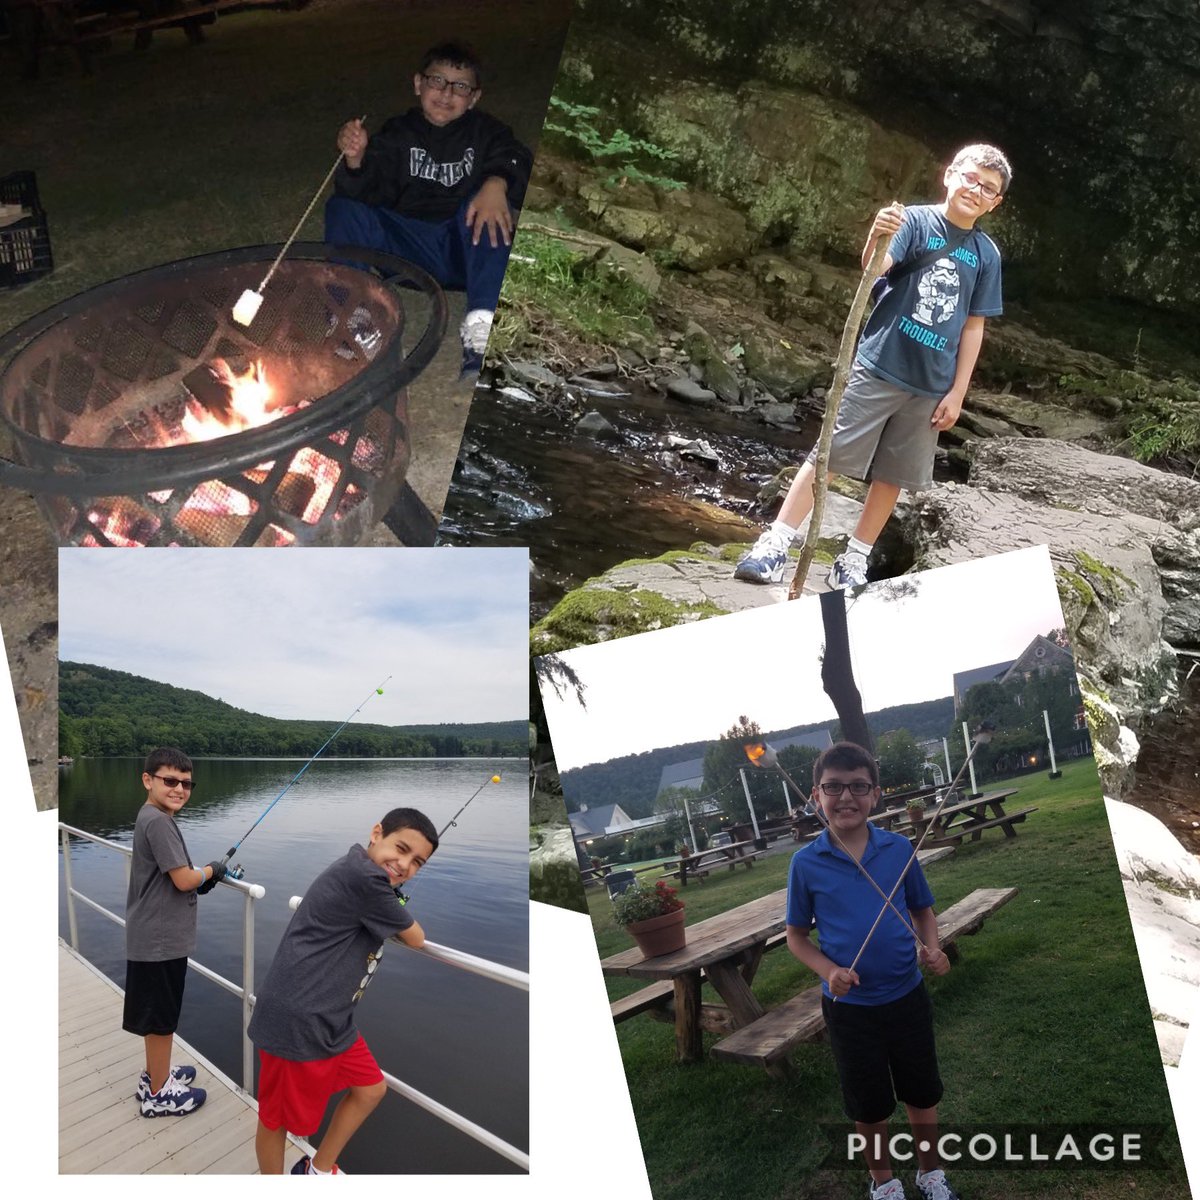 Our almost 5th grader Gabe has been very busy this summer traveling with his mom and brother Chris, a PS 84 graduate! #smores #hikes #fishing #SteinwaySummer #SummerSWAG @ps84q